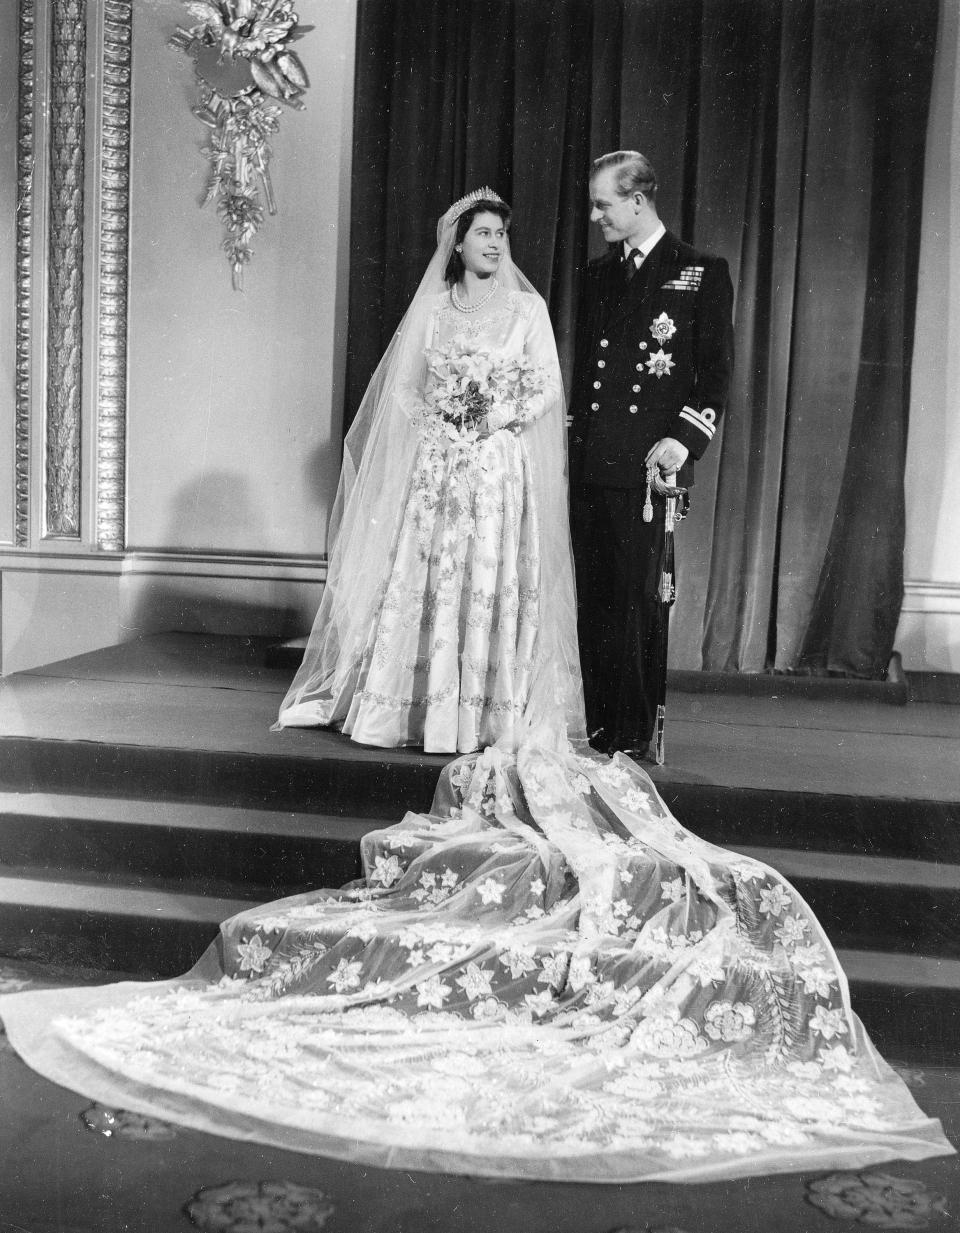 FILE - Britain's Princess Elizabeth and her new husband Prince Philip, the Duke of Edinburgh, pose for a photo at Buckingham Palace after their marriage in Westminster Abbey, in London. Nov. 20, 1947. Queen Elizabeth II will mark 70 years on the throne Sunday, Feb. 6, 2022 an unprecedented reign that has made her a symbol of stability as the United Kingdom navigated an age of uncertainty. (AP Photo, File)